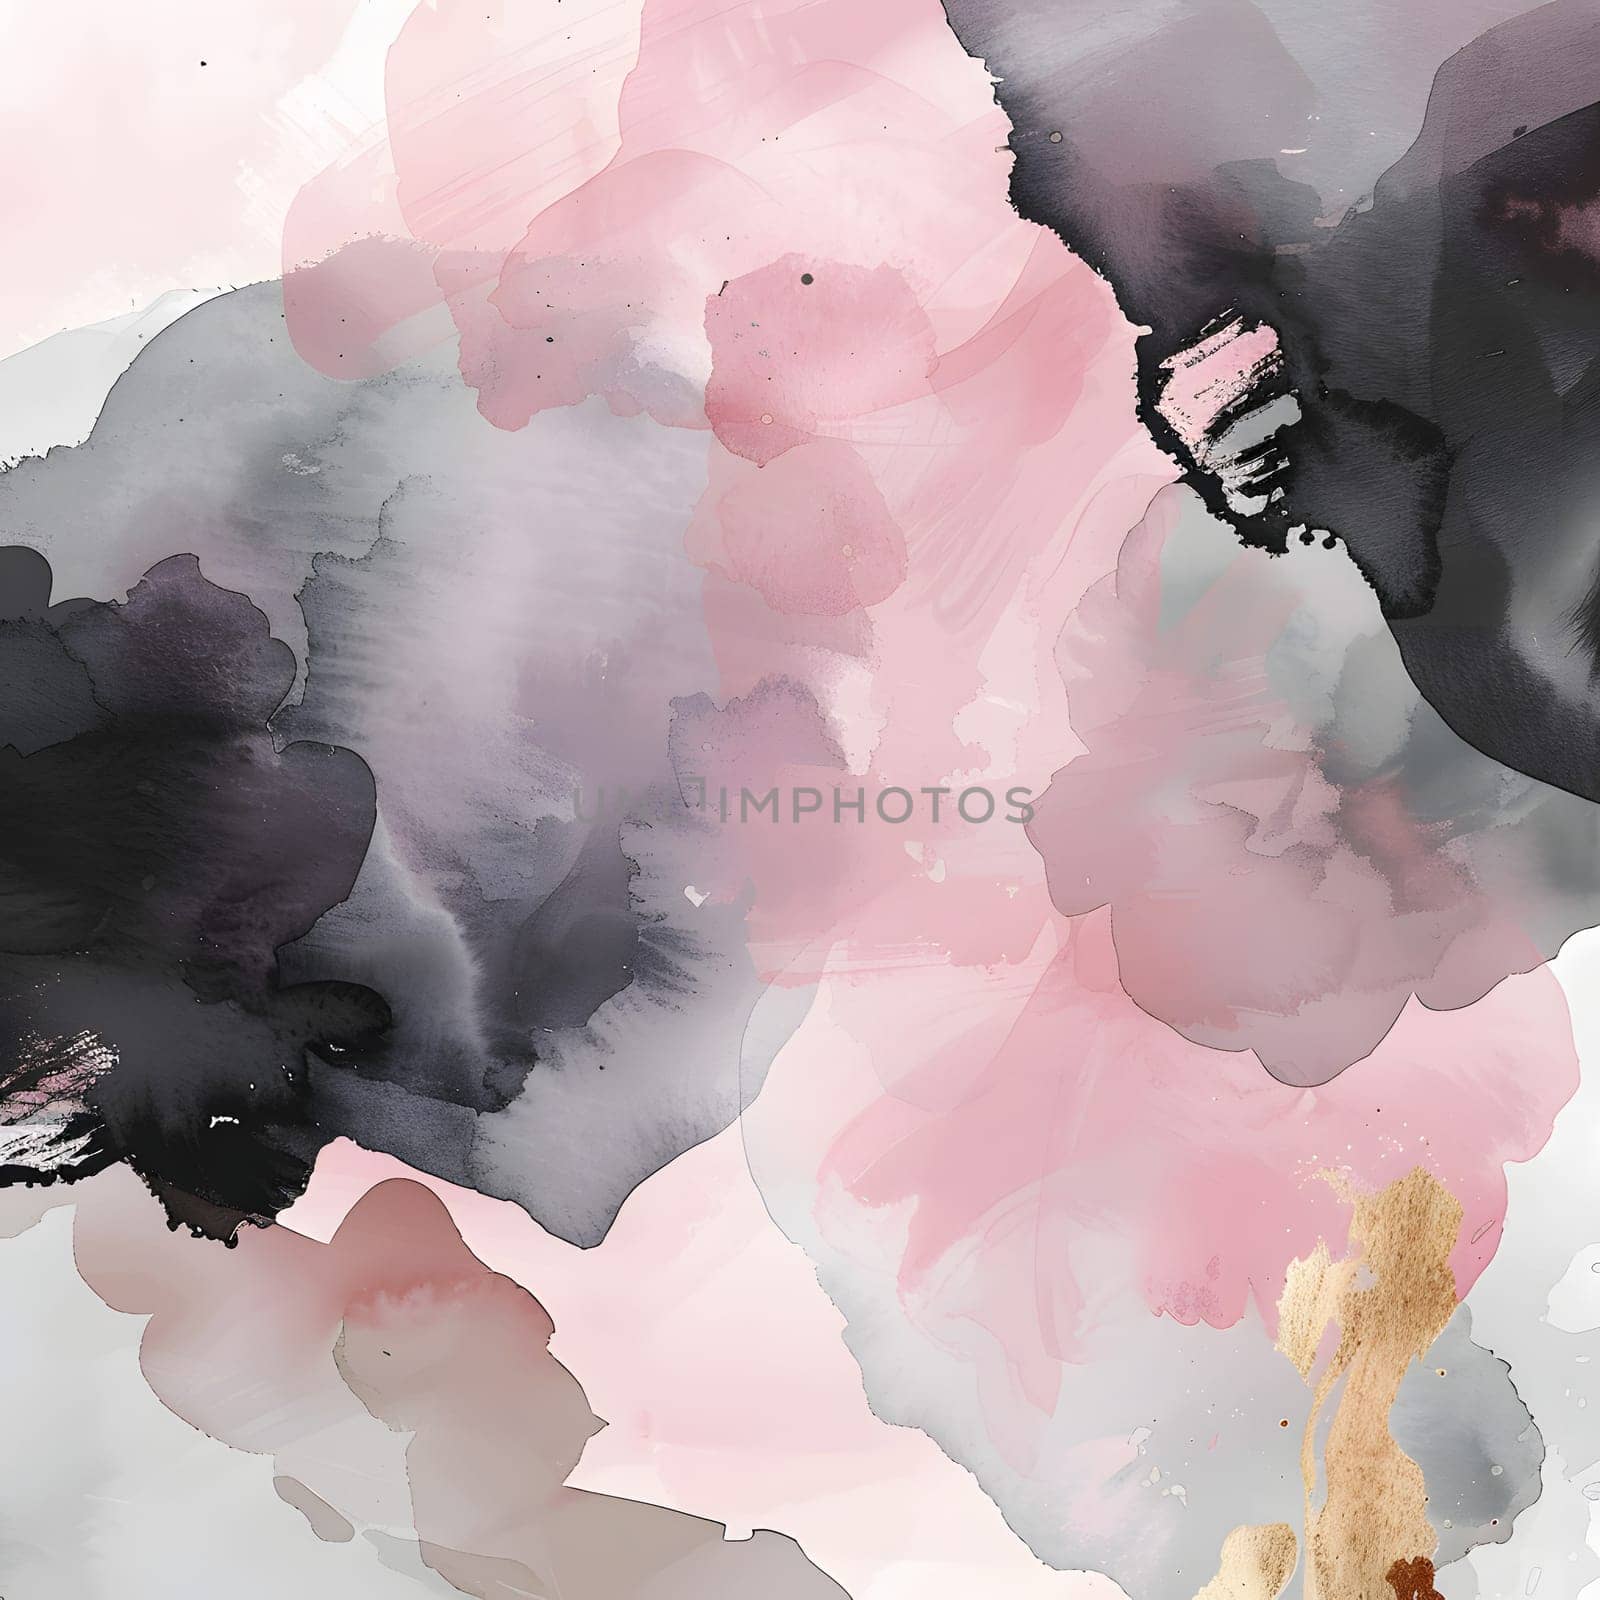 Closeup watercolor painting with pink and black floral details by Nadtochiy